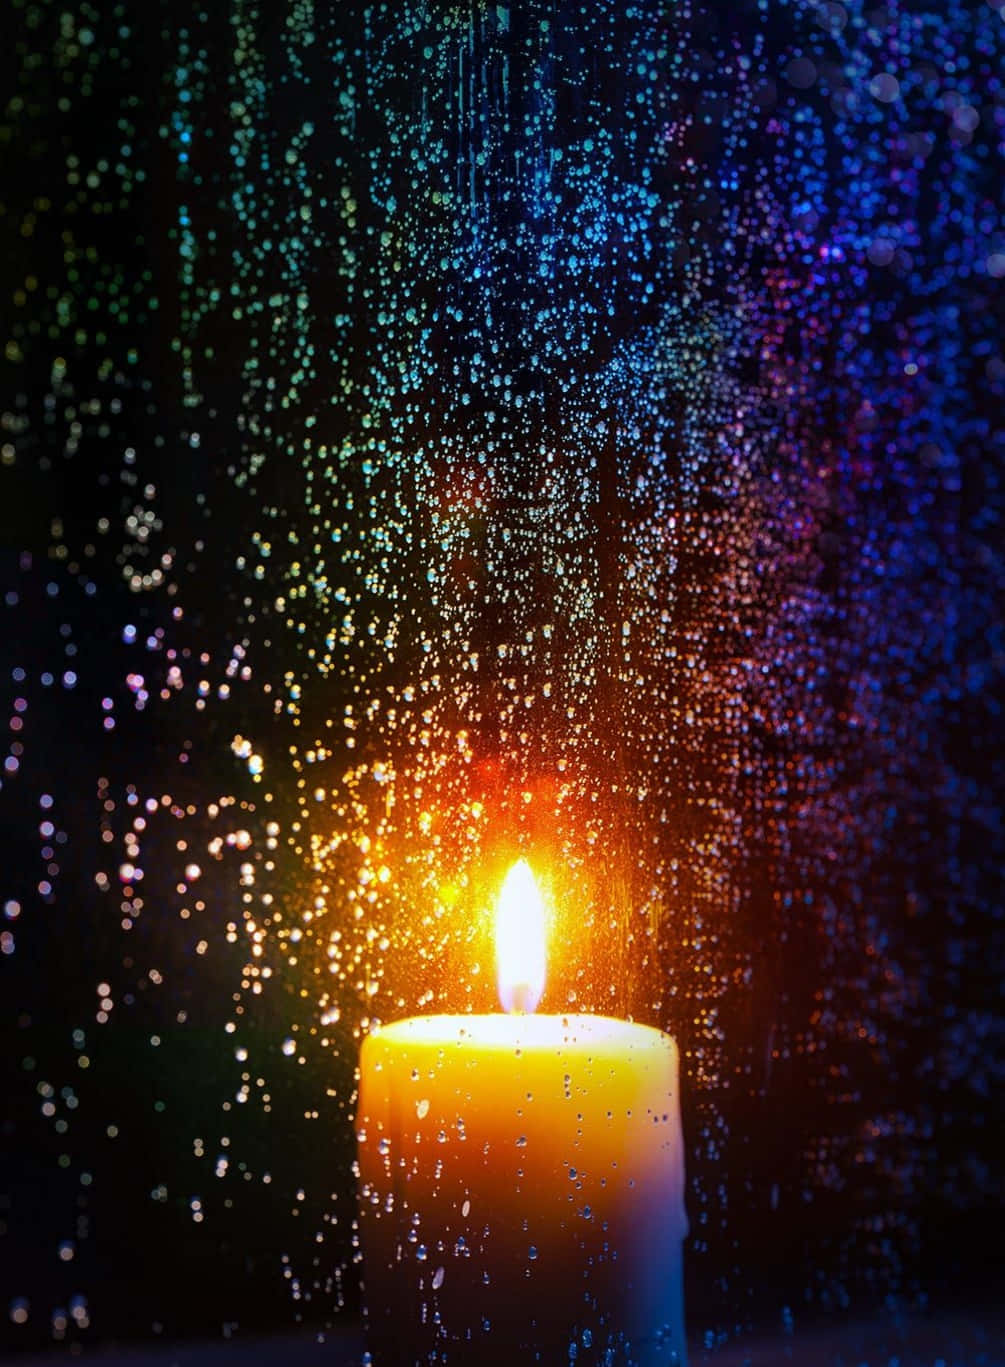 A Candle Is Lit In Front Of A Window With Rain Drops